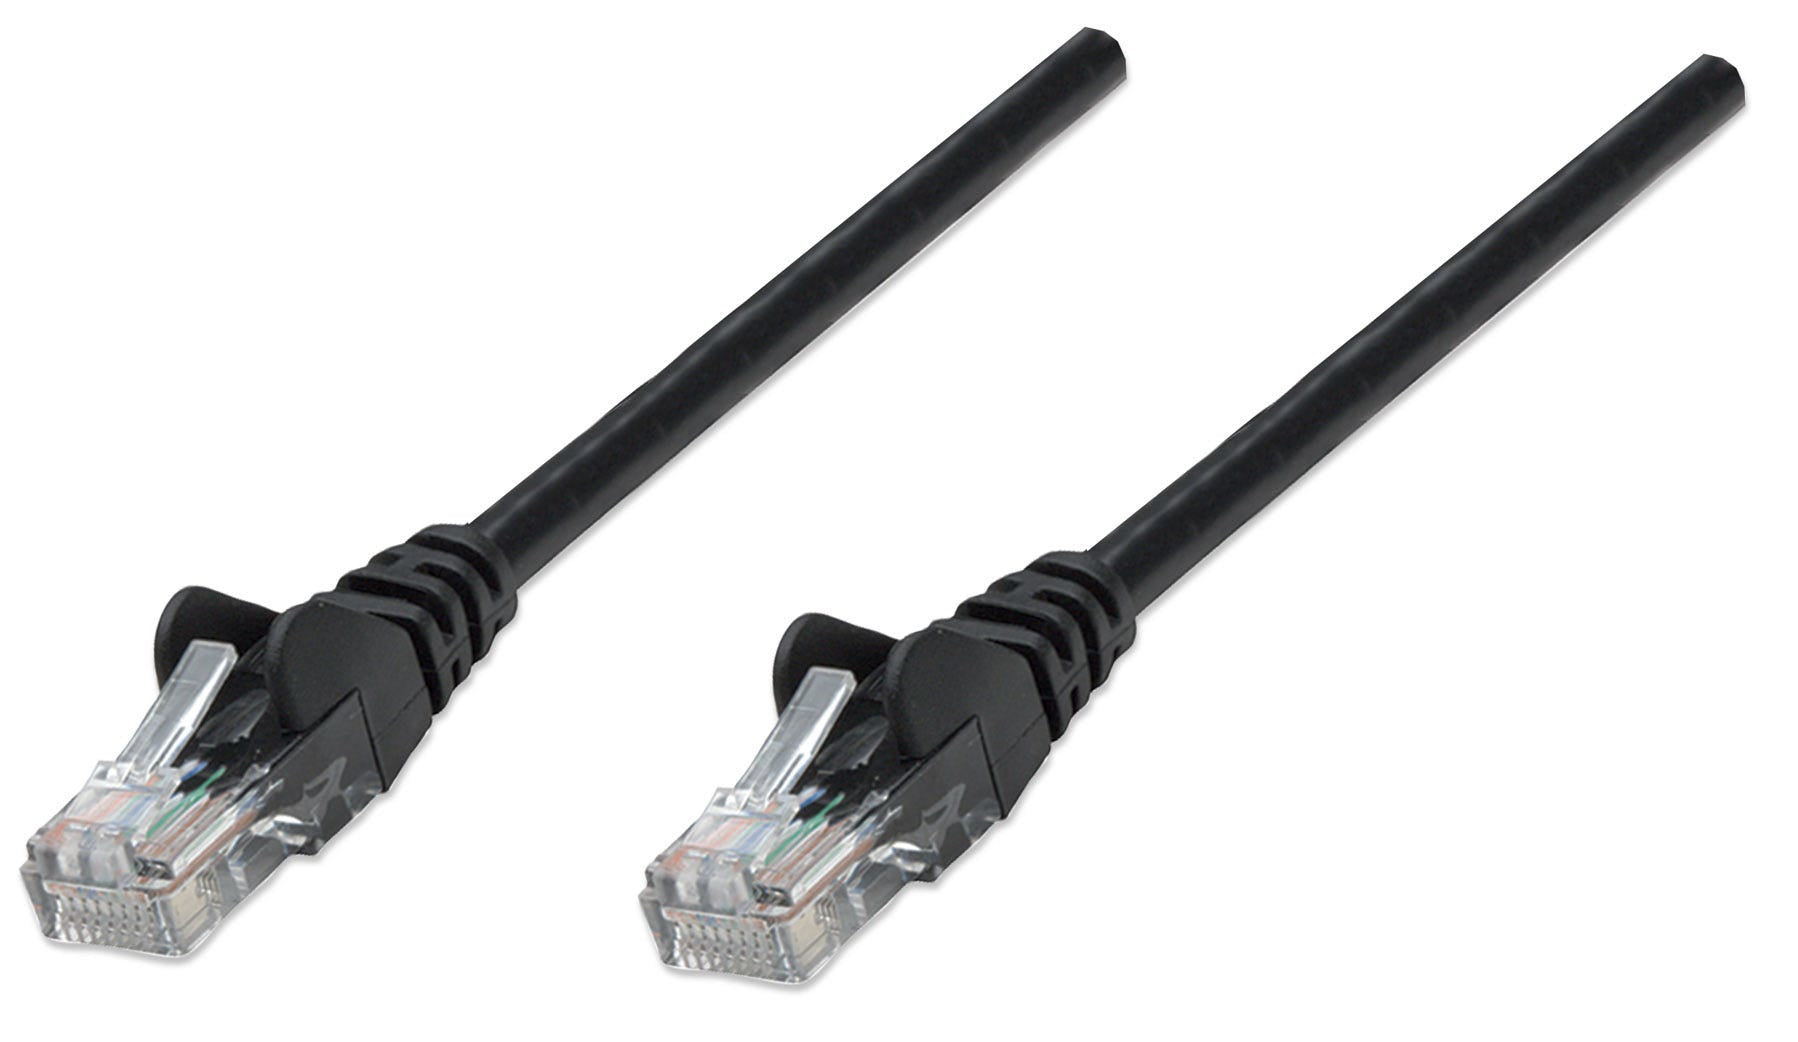 Intellinet Network Patch Cable, Cat5e, 0.25m, Black, CCA, U/UTP, PVC, RJ45, Gold Plated Contacts, Snagless, Booted, Lifetime Warranty, Polybag